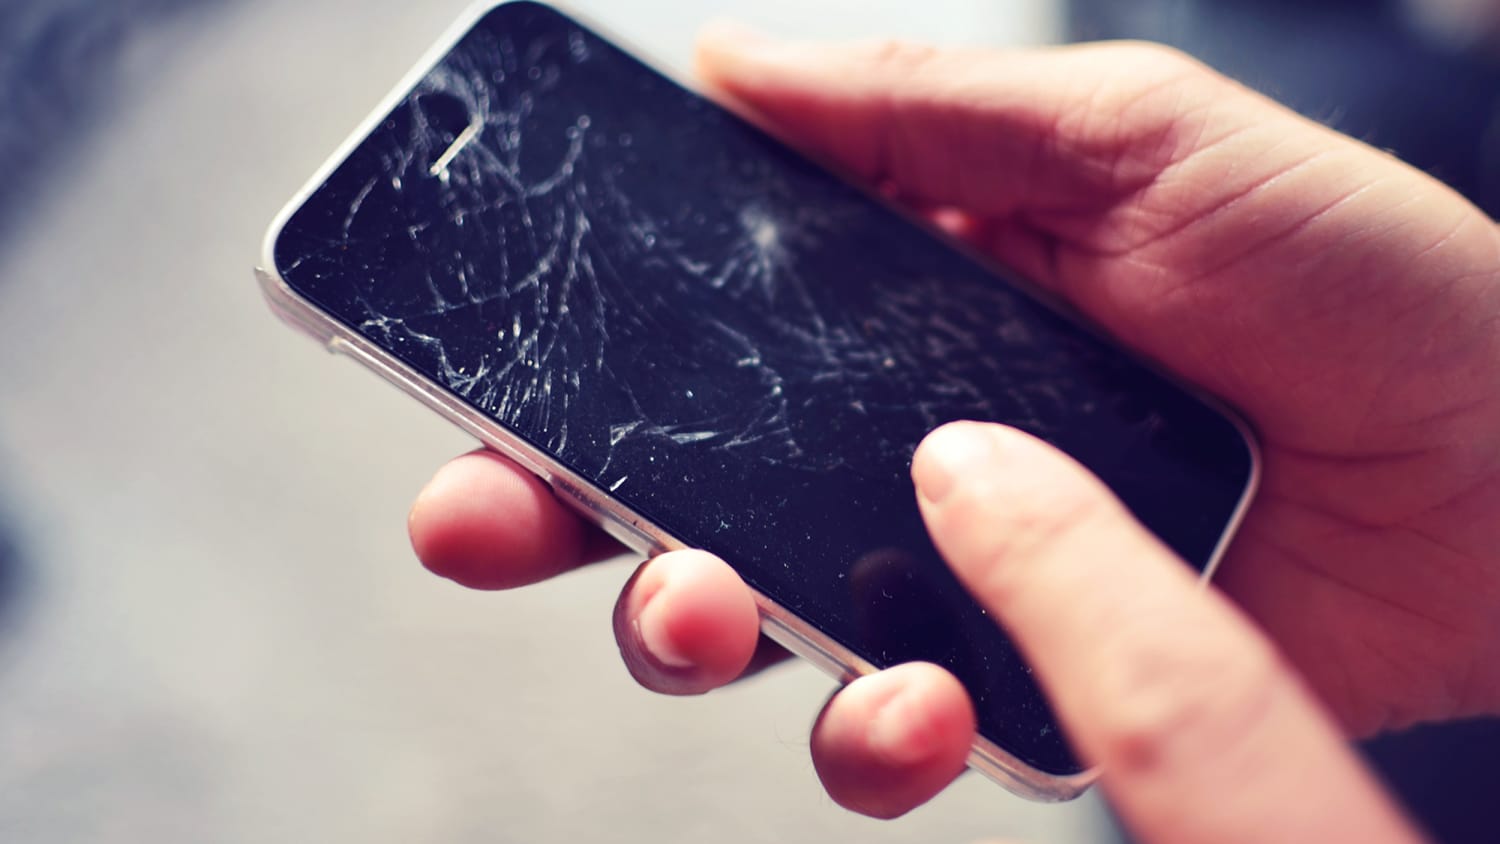 Is it really that bad to use a cracked phone screen? - TODAY.com